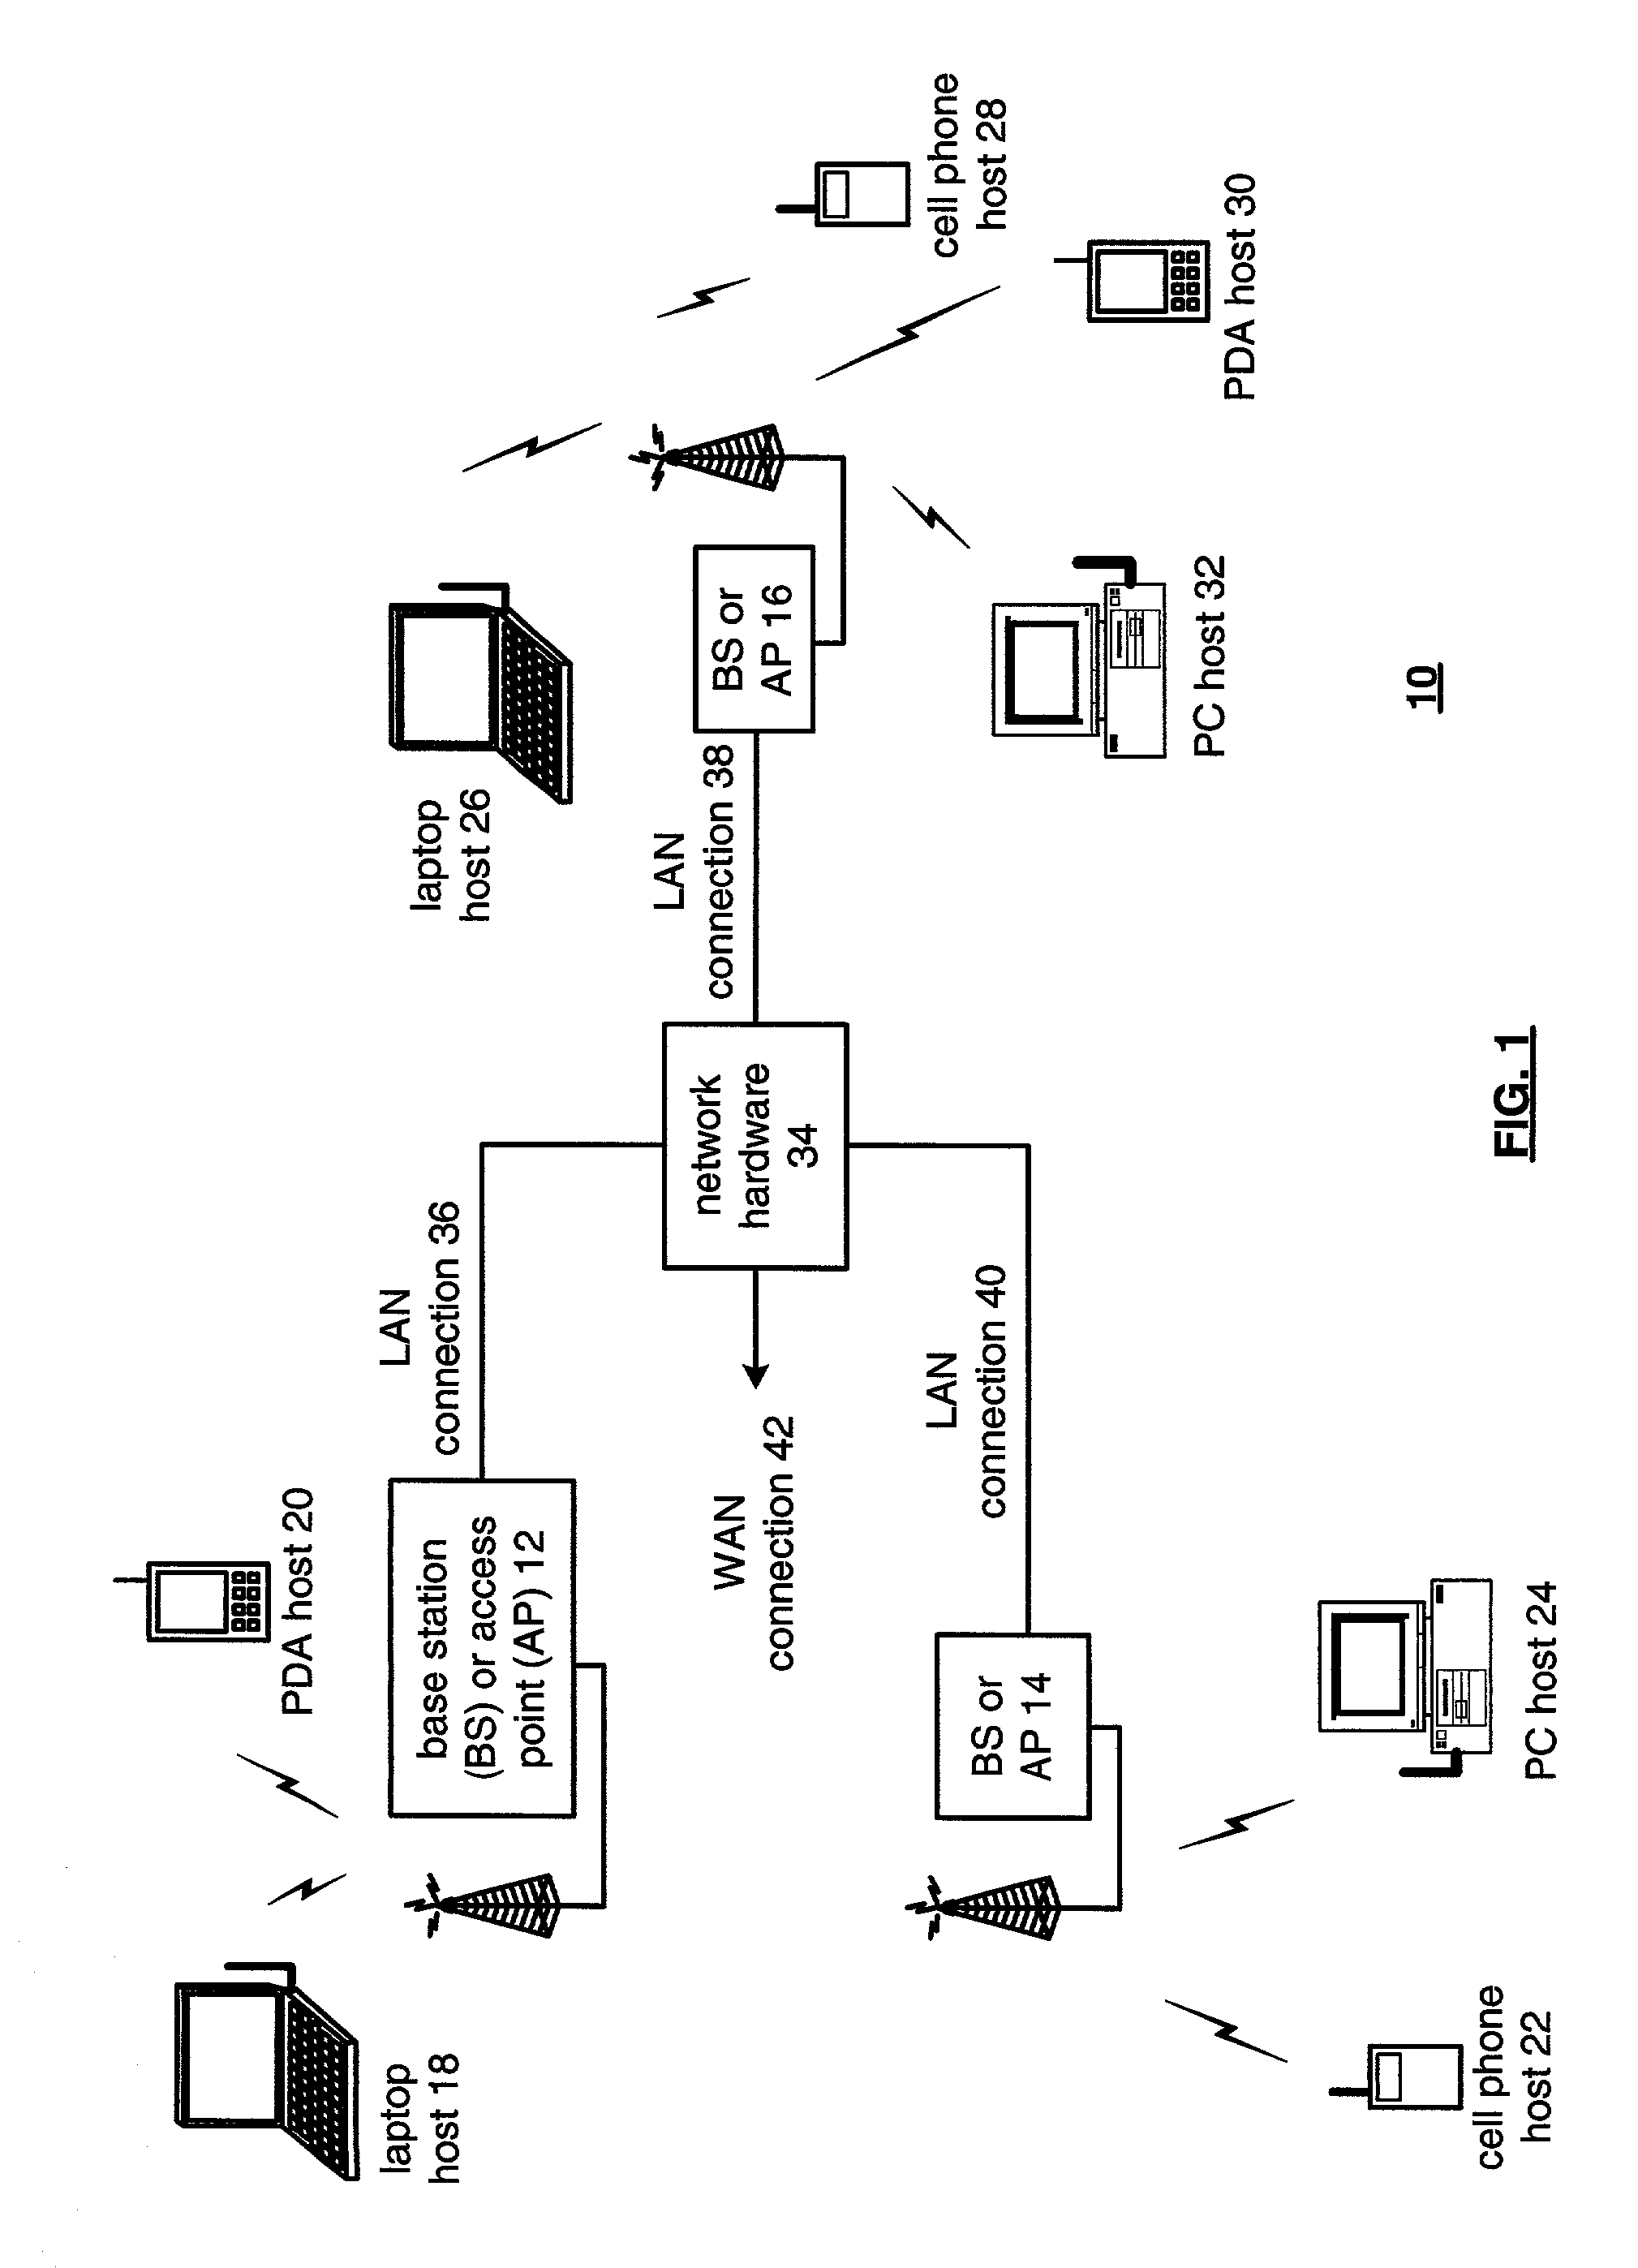 Programmable mixer for reducing local oscillator feedthrough and radio applications thereof